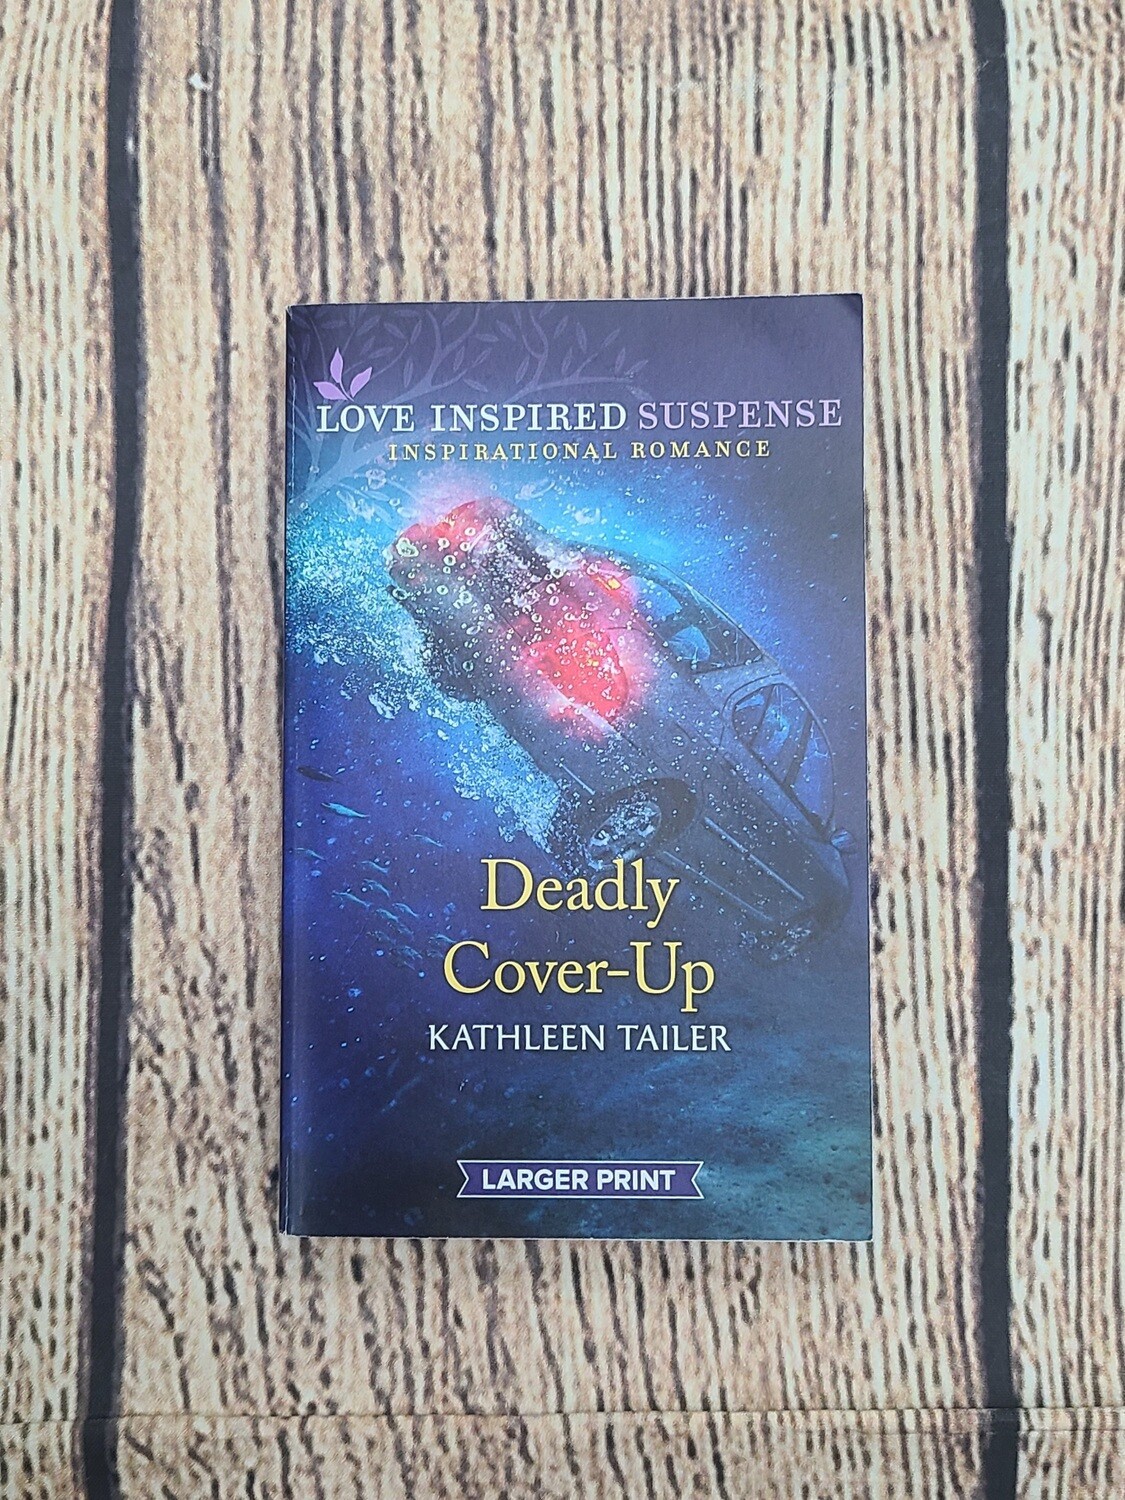 Deadly Cover-Up by Kathleen Tailer - Larger Print - Great Condition